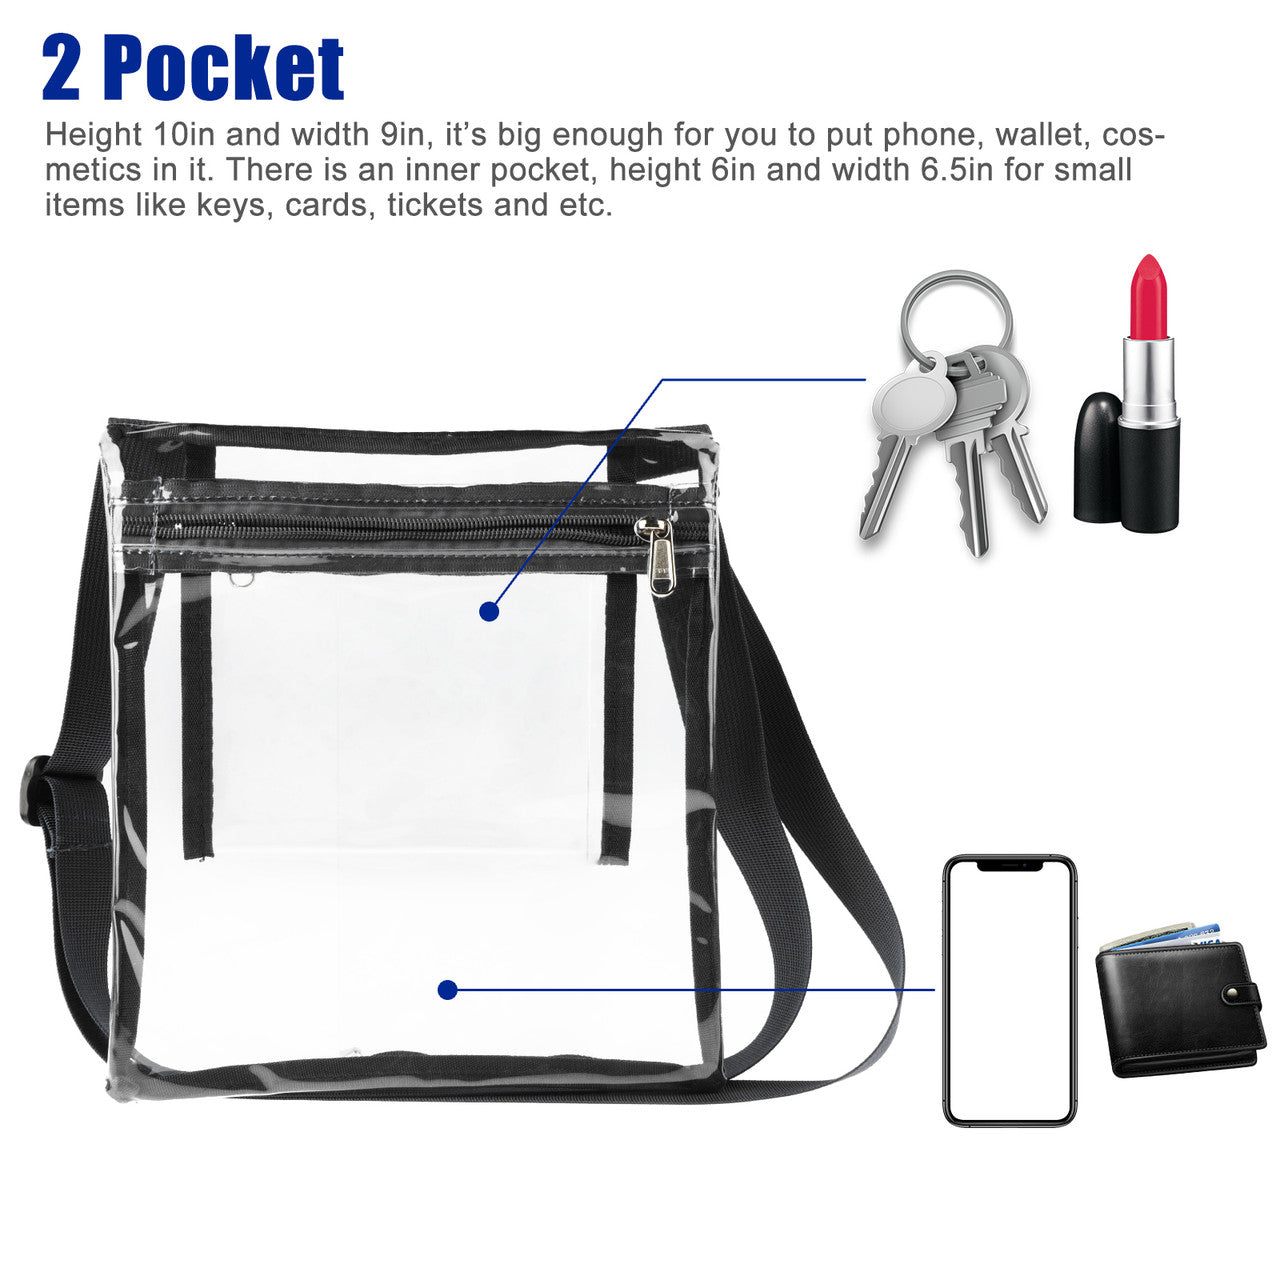 Black Transparent Crossbody Bag with Adjustable Strap Stadium Approved Security Approved